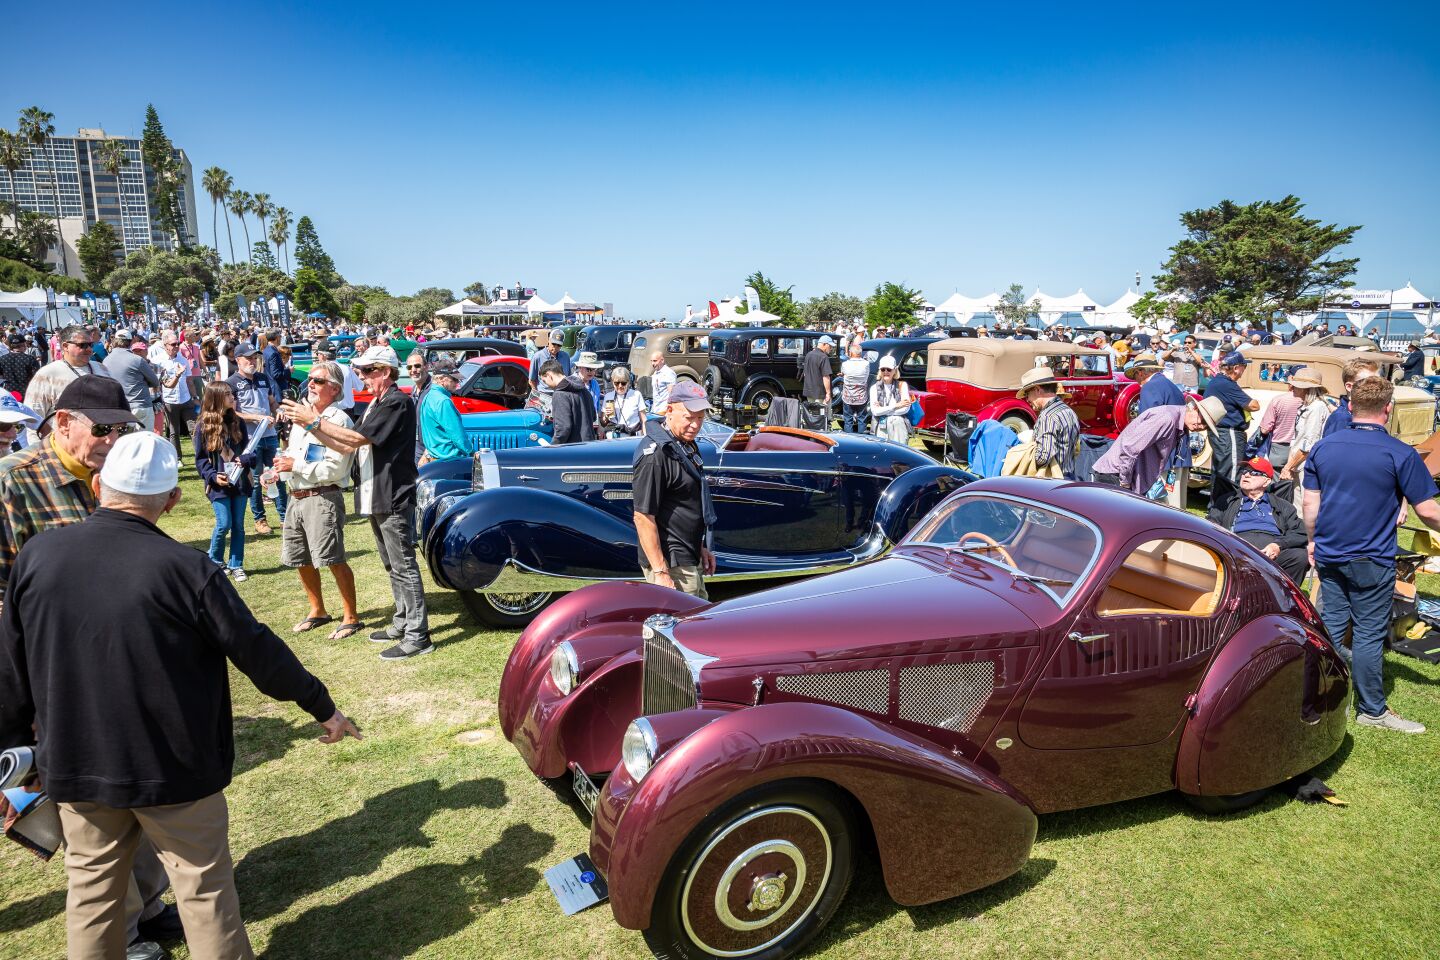 This year's featured marque, Bugatti, gets a showcase at the Concours d'Elegance.